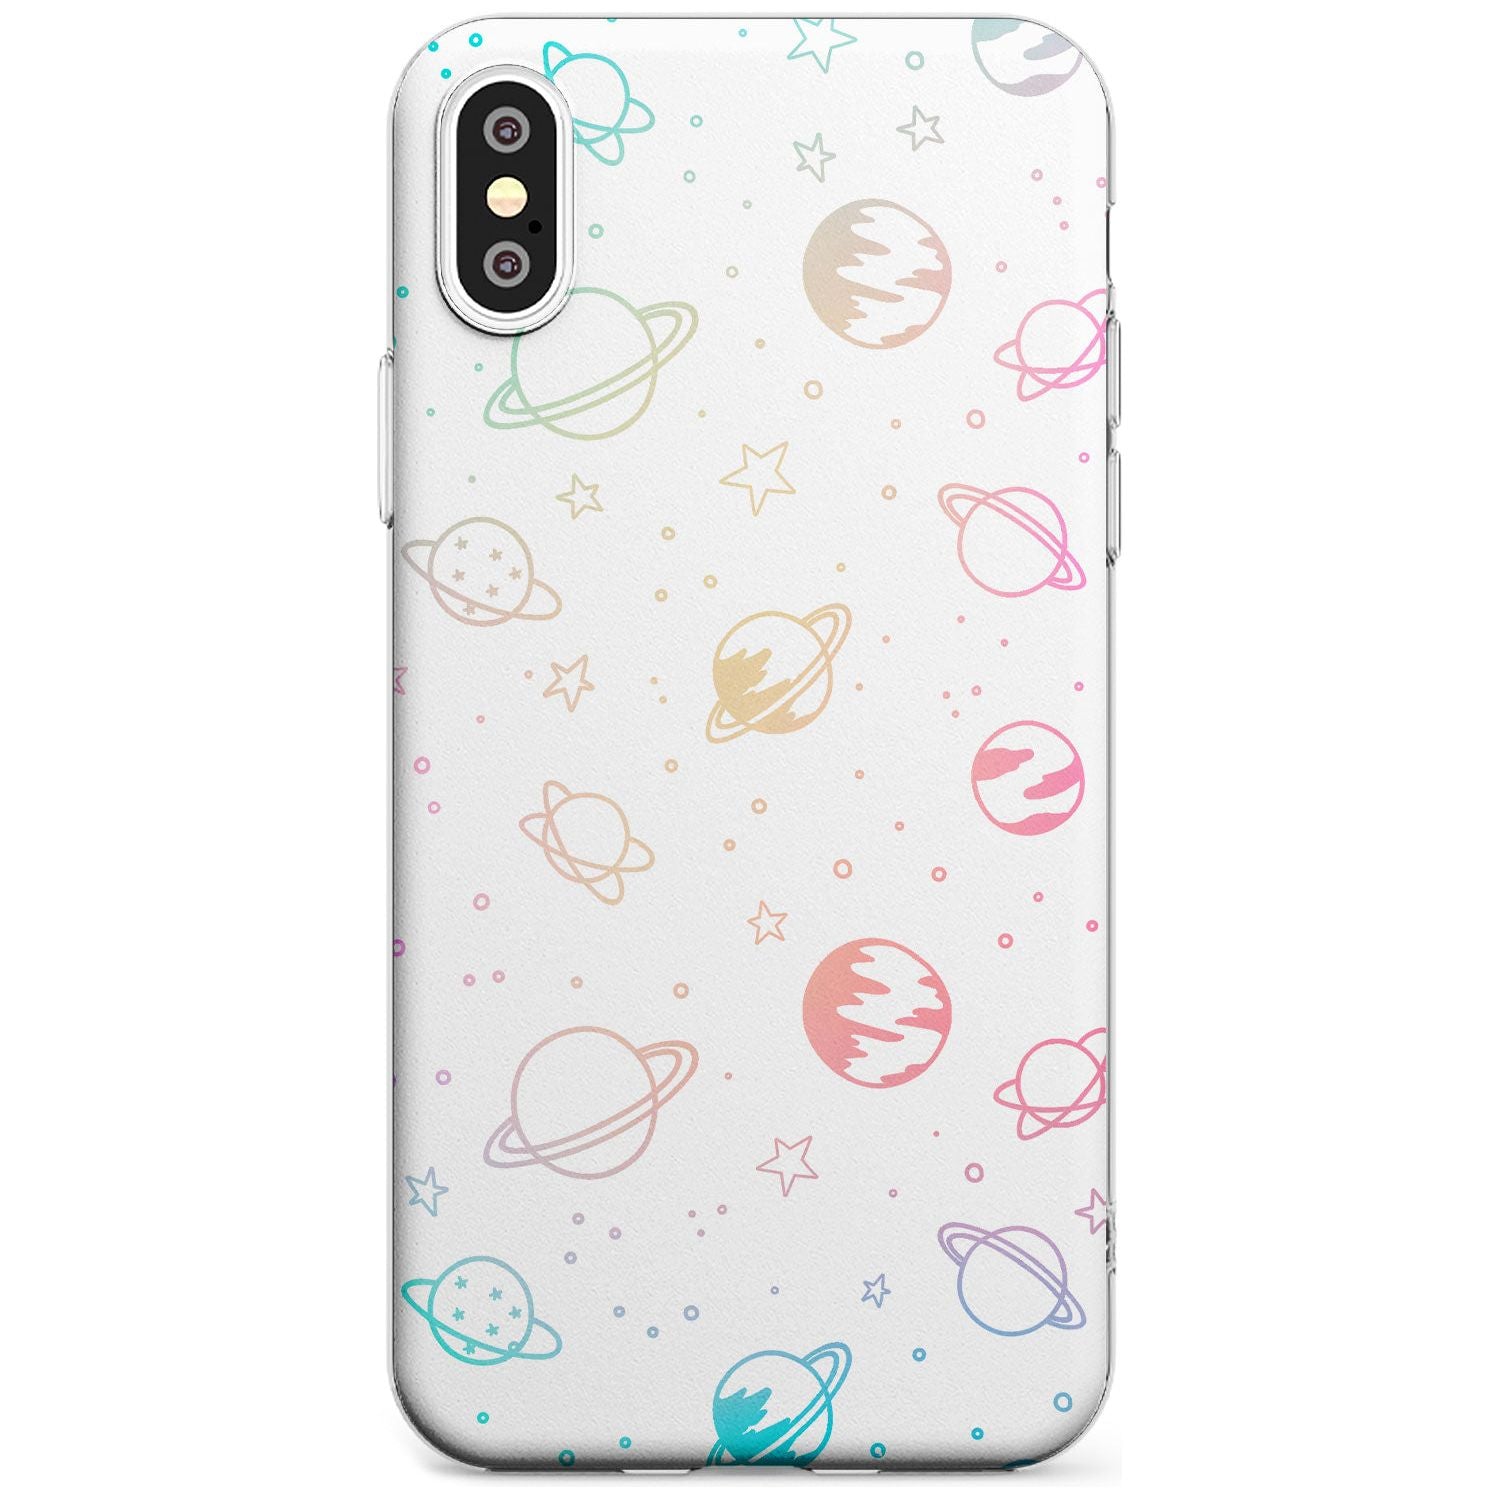 Outer Space Outlines: Pastels on White Black Impact Phone Case for iPhone X XS Max XR